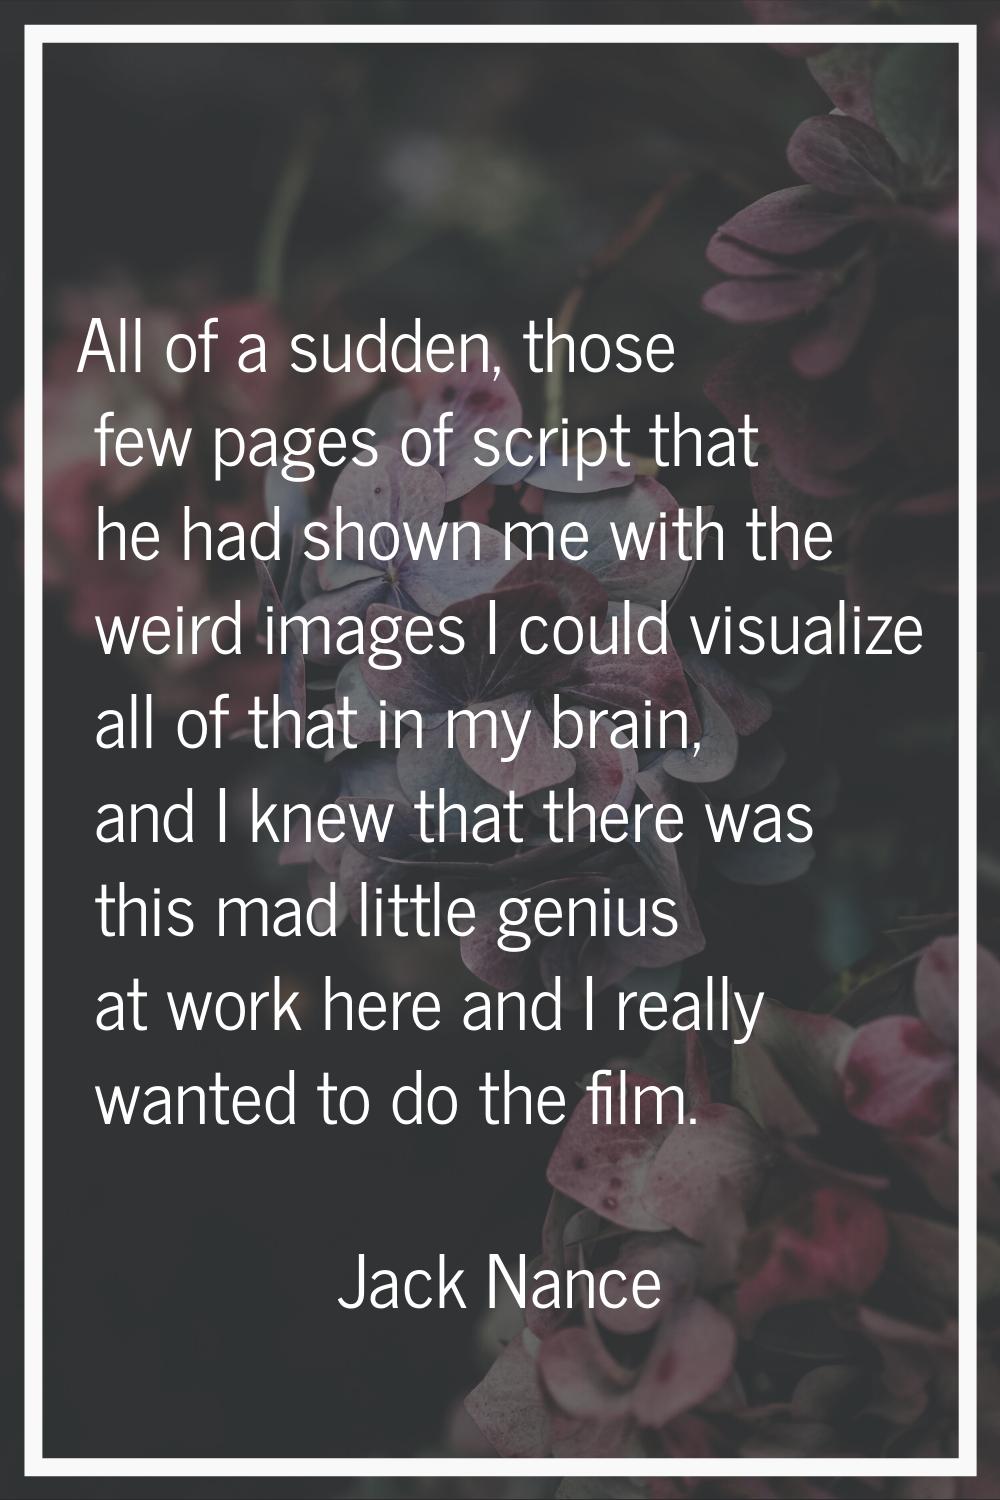 All of a sudden, those few pages of script that he had shown me with the weird images I could visua